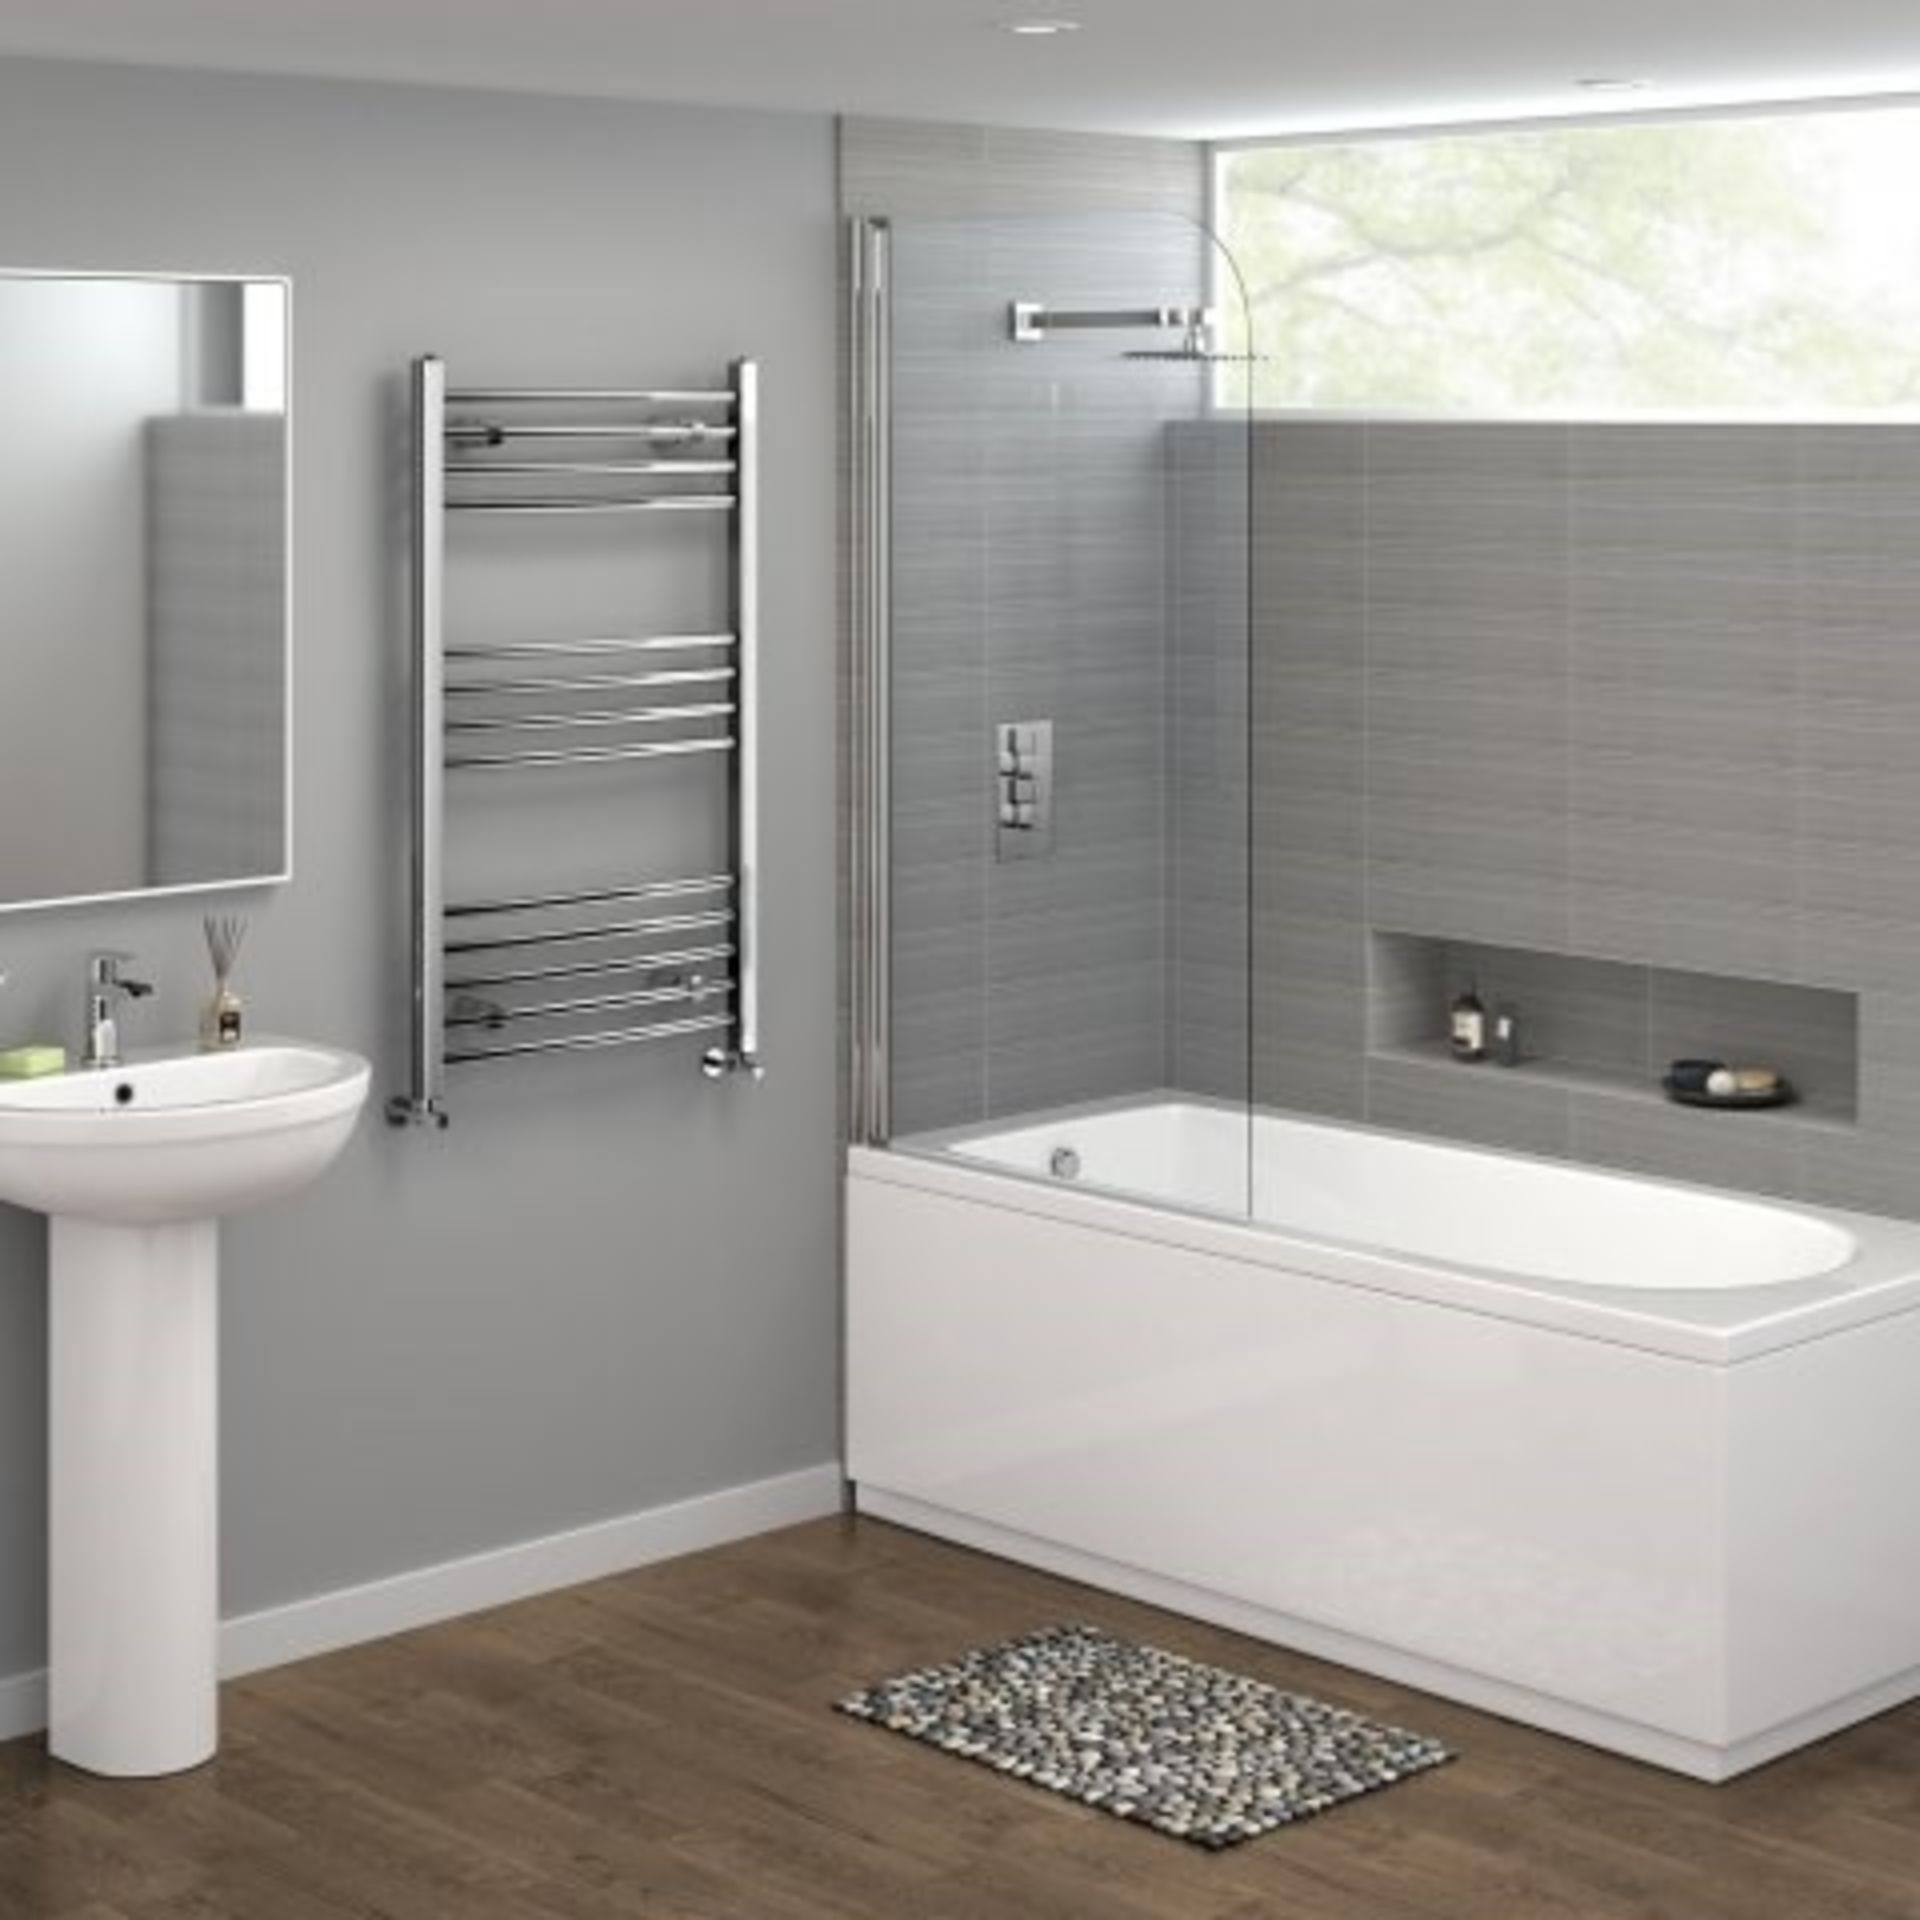 New 1200x500mm - 20mm Tubes - RRP £219.99.Chrome Curved Rail Ladder Towel Radiator. Our Nancy _New - Image 2 of 2